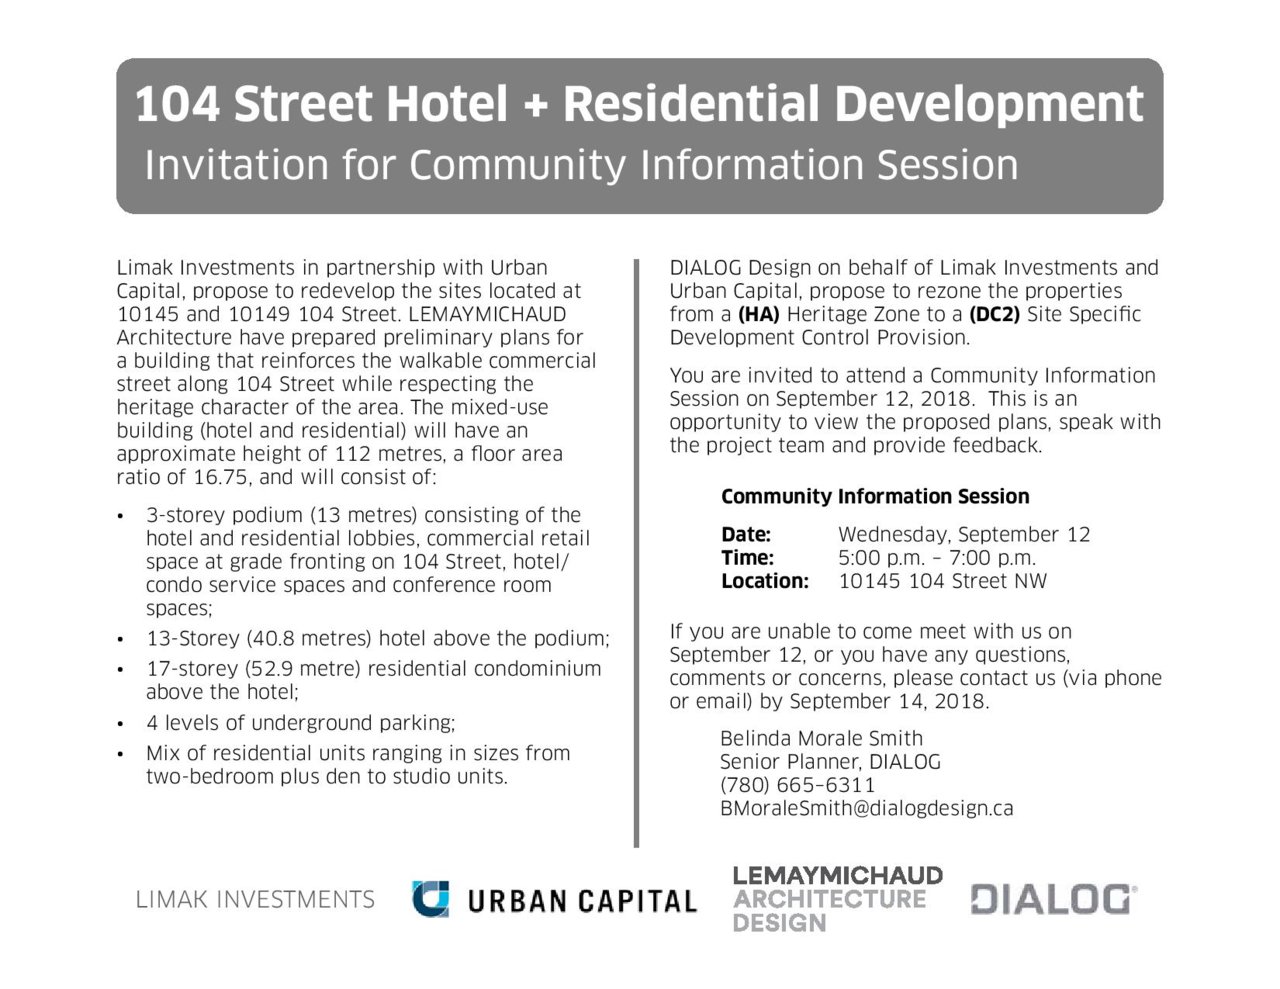 10145 104 St Community Information Session Invite-page-001.jpg